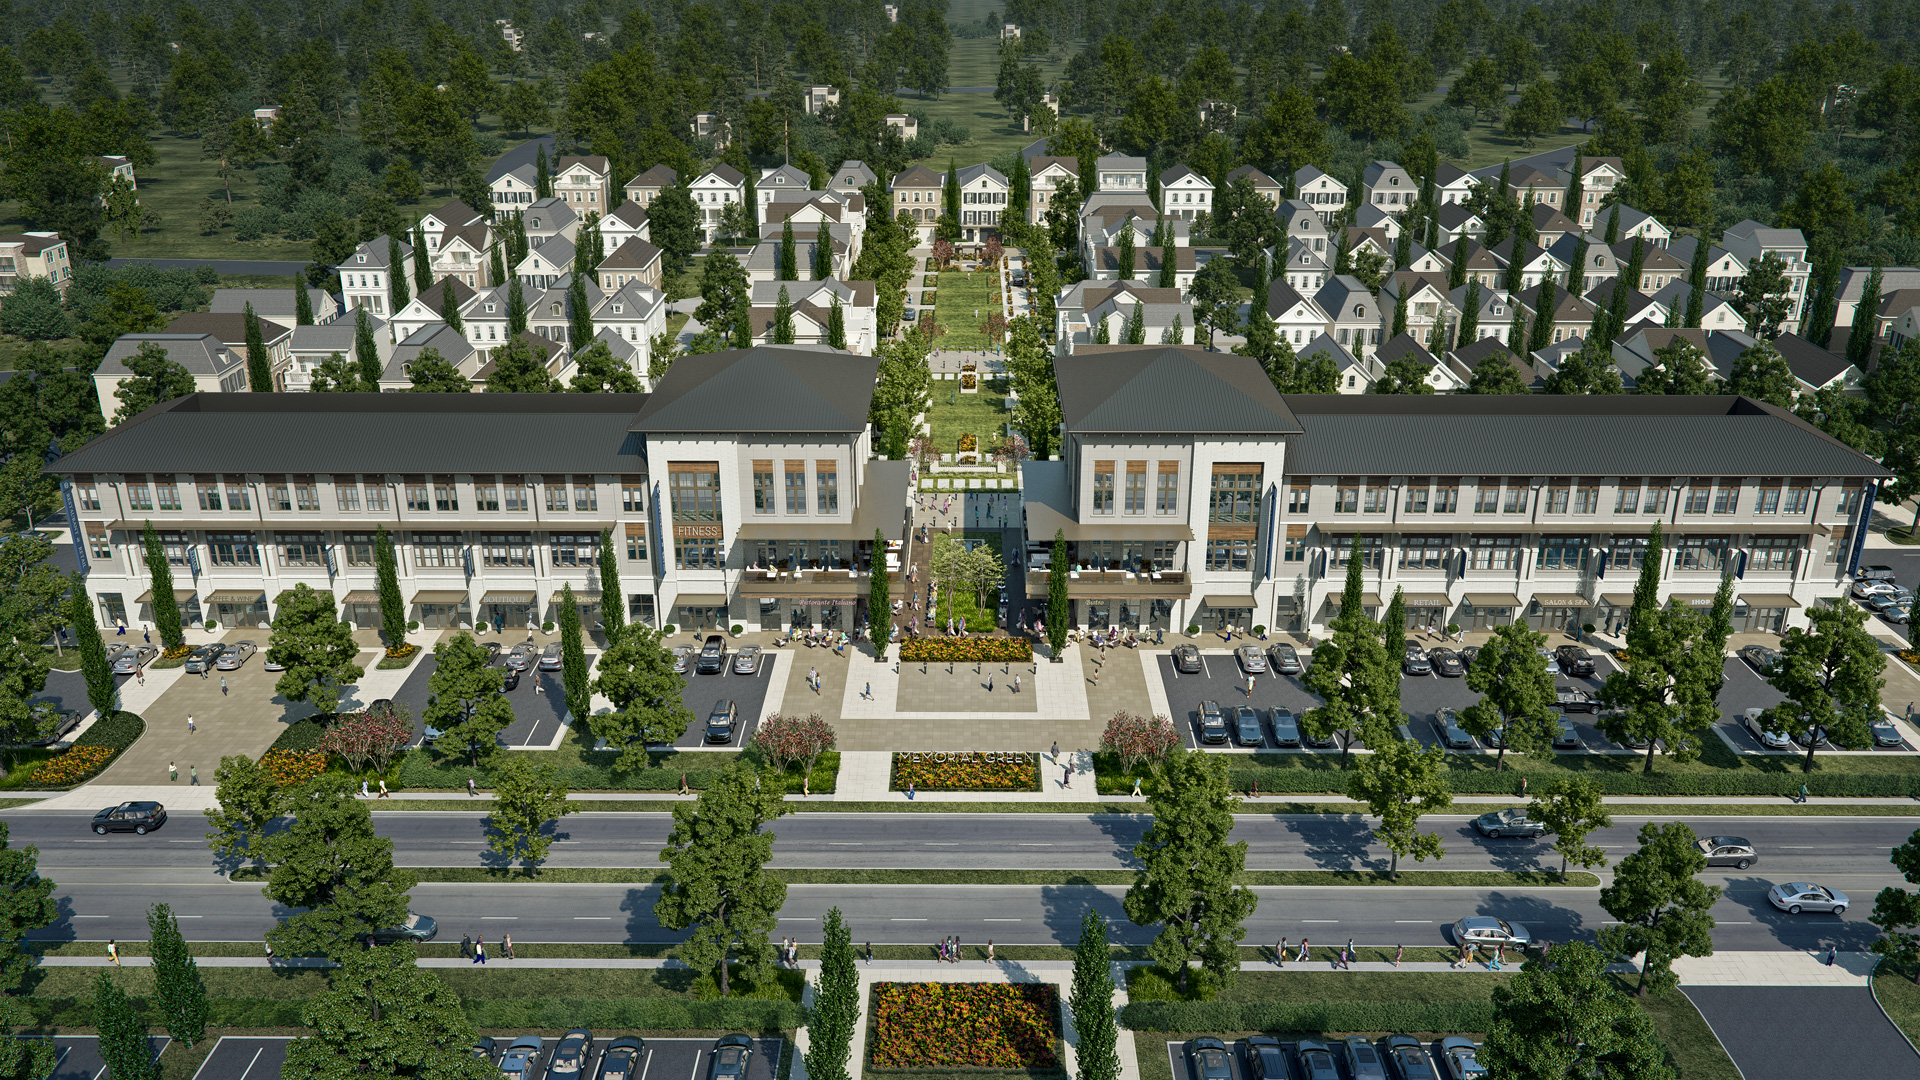 Memorial Green’s village concept is located in one of Houston’s most prominent zip codes, in the heart of the Memorial neighborhood.